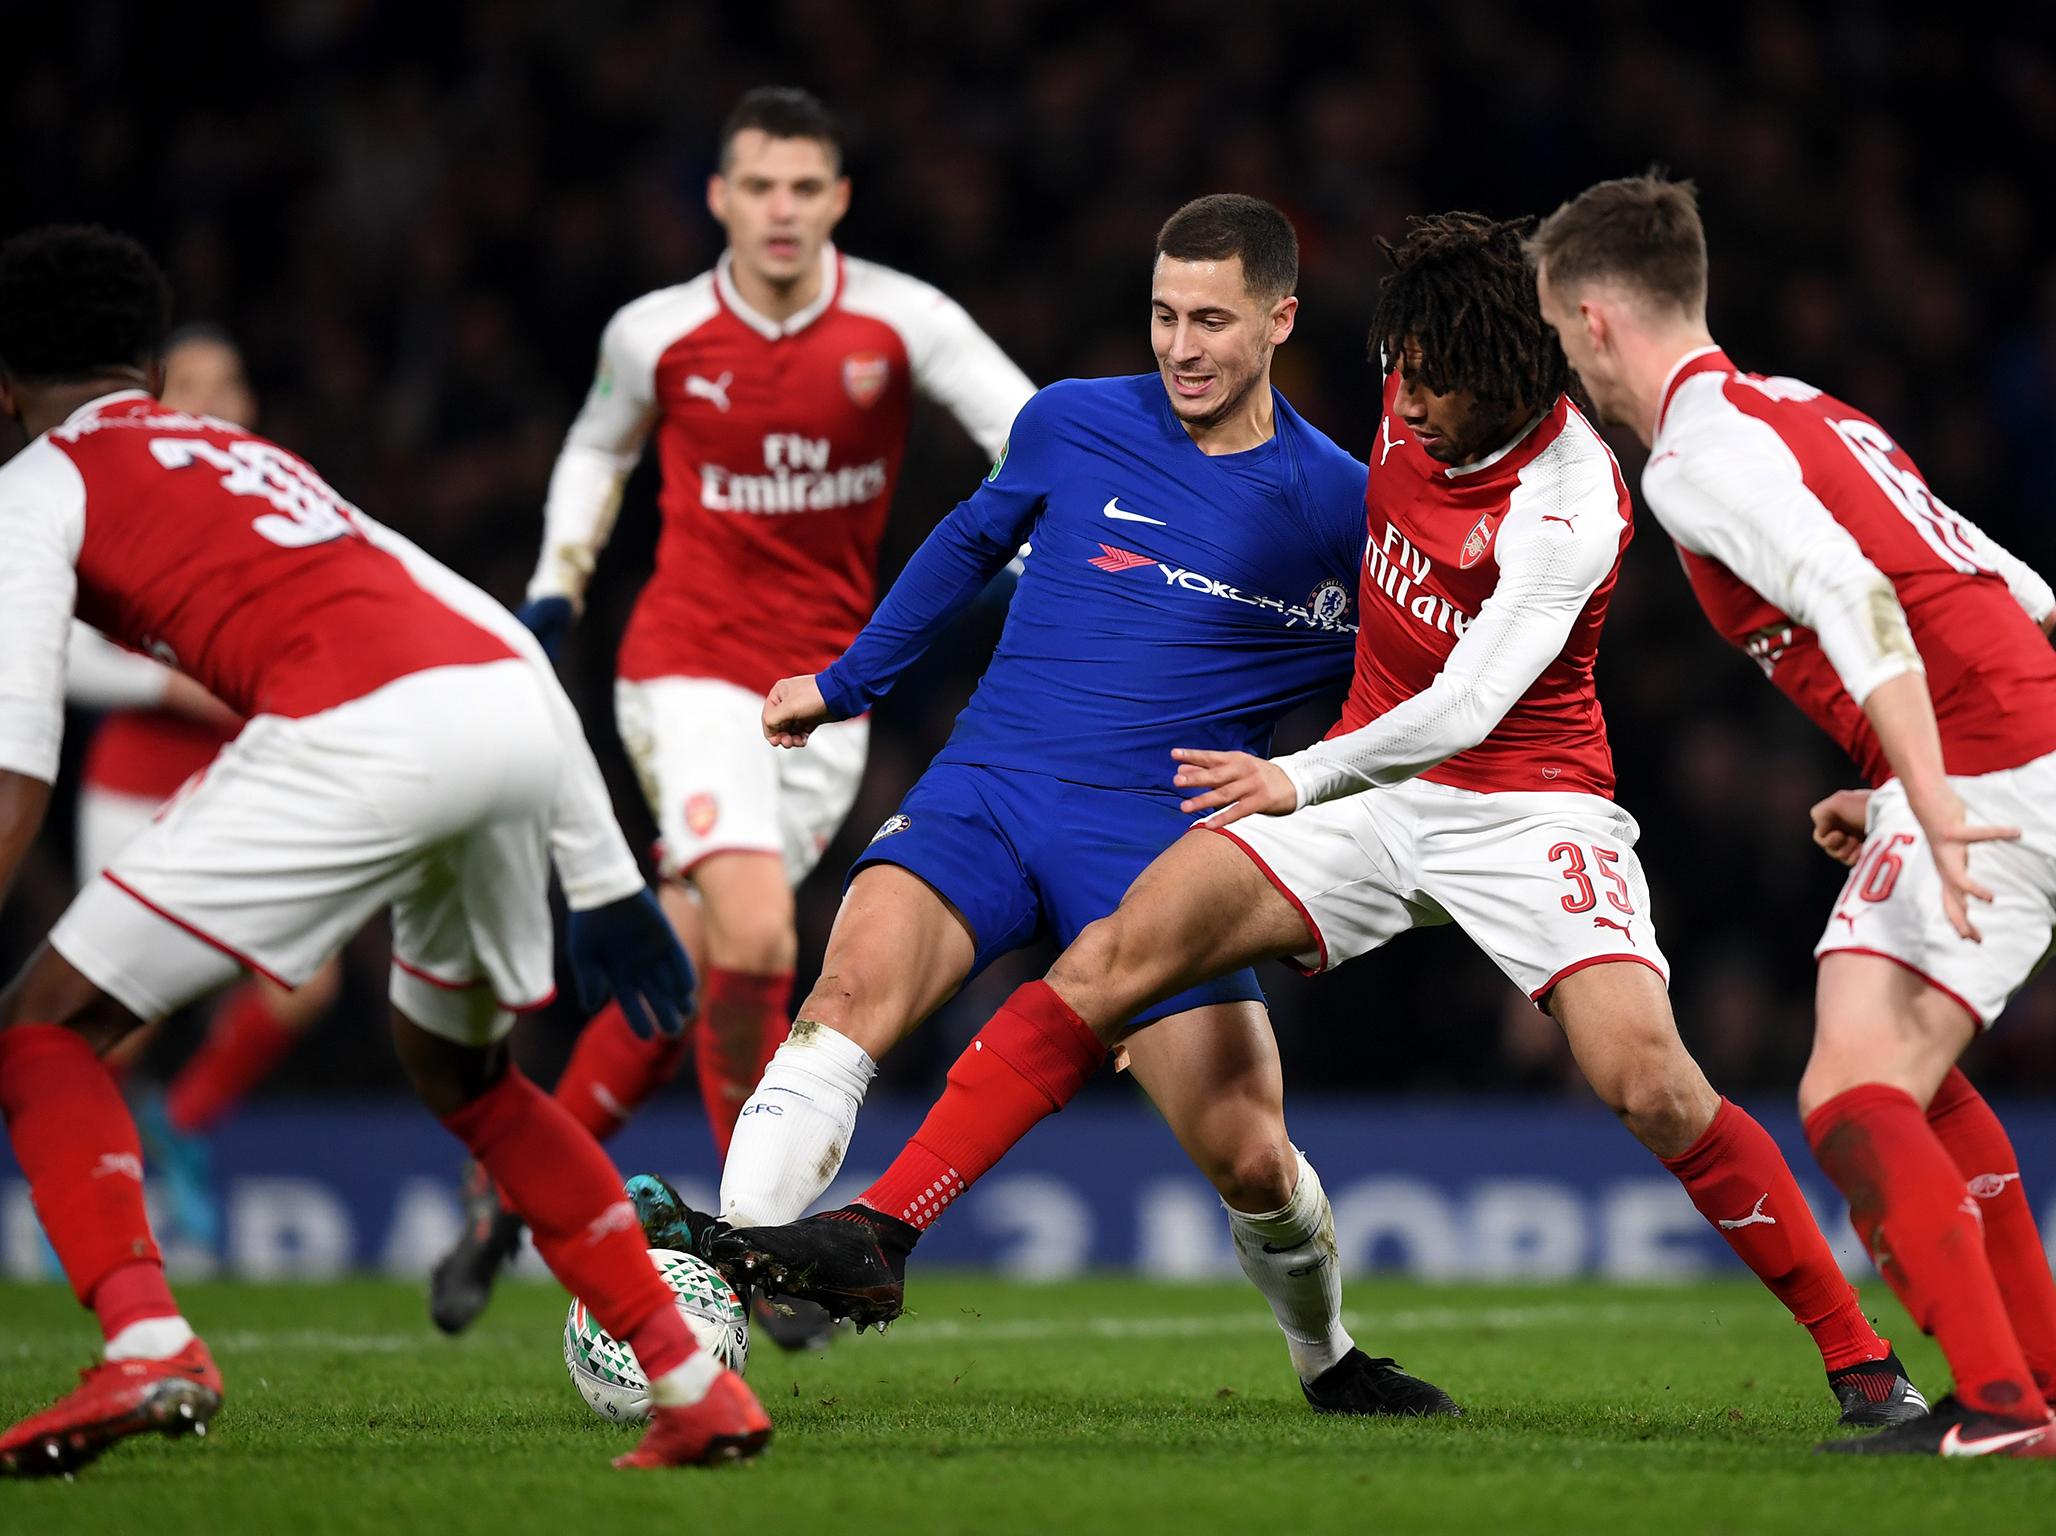 Arsenal snuffed out Chelsea’s attacking threat at Stamford Bridge